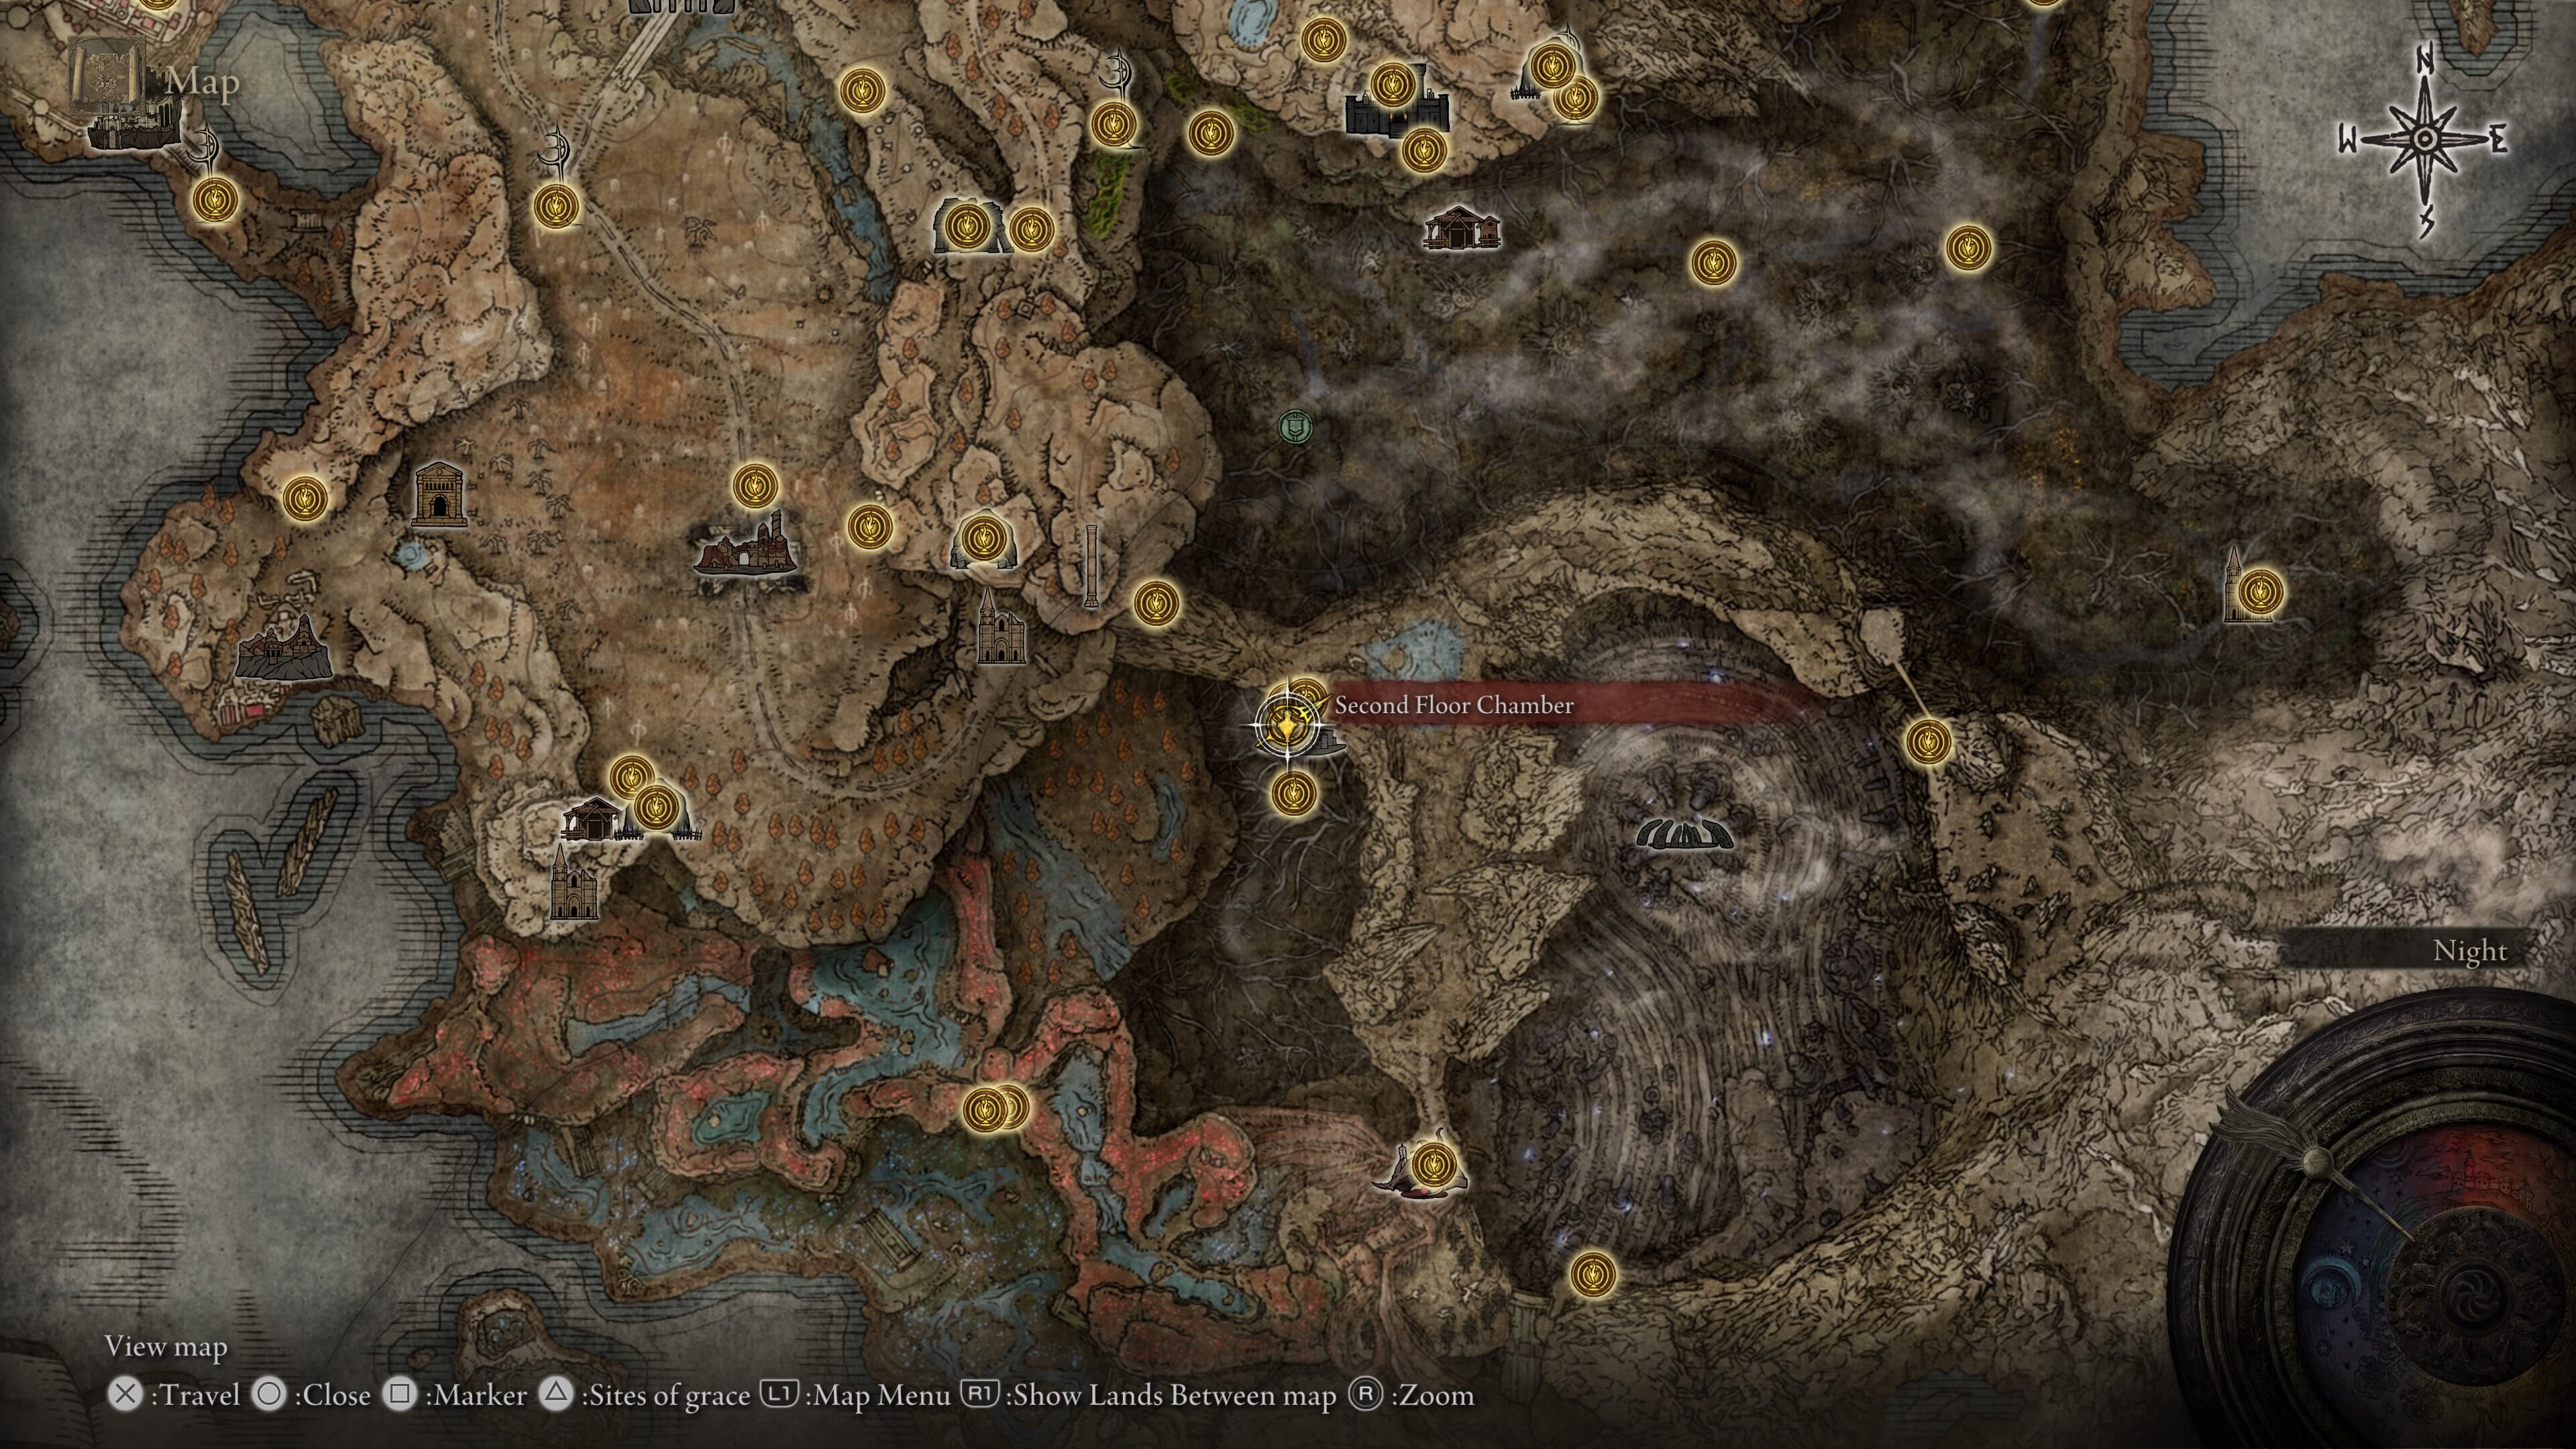 elden ring midra boss fight - the map in game showing where to find midra